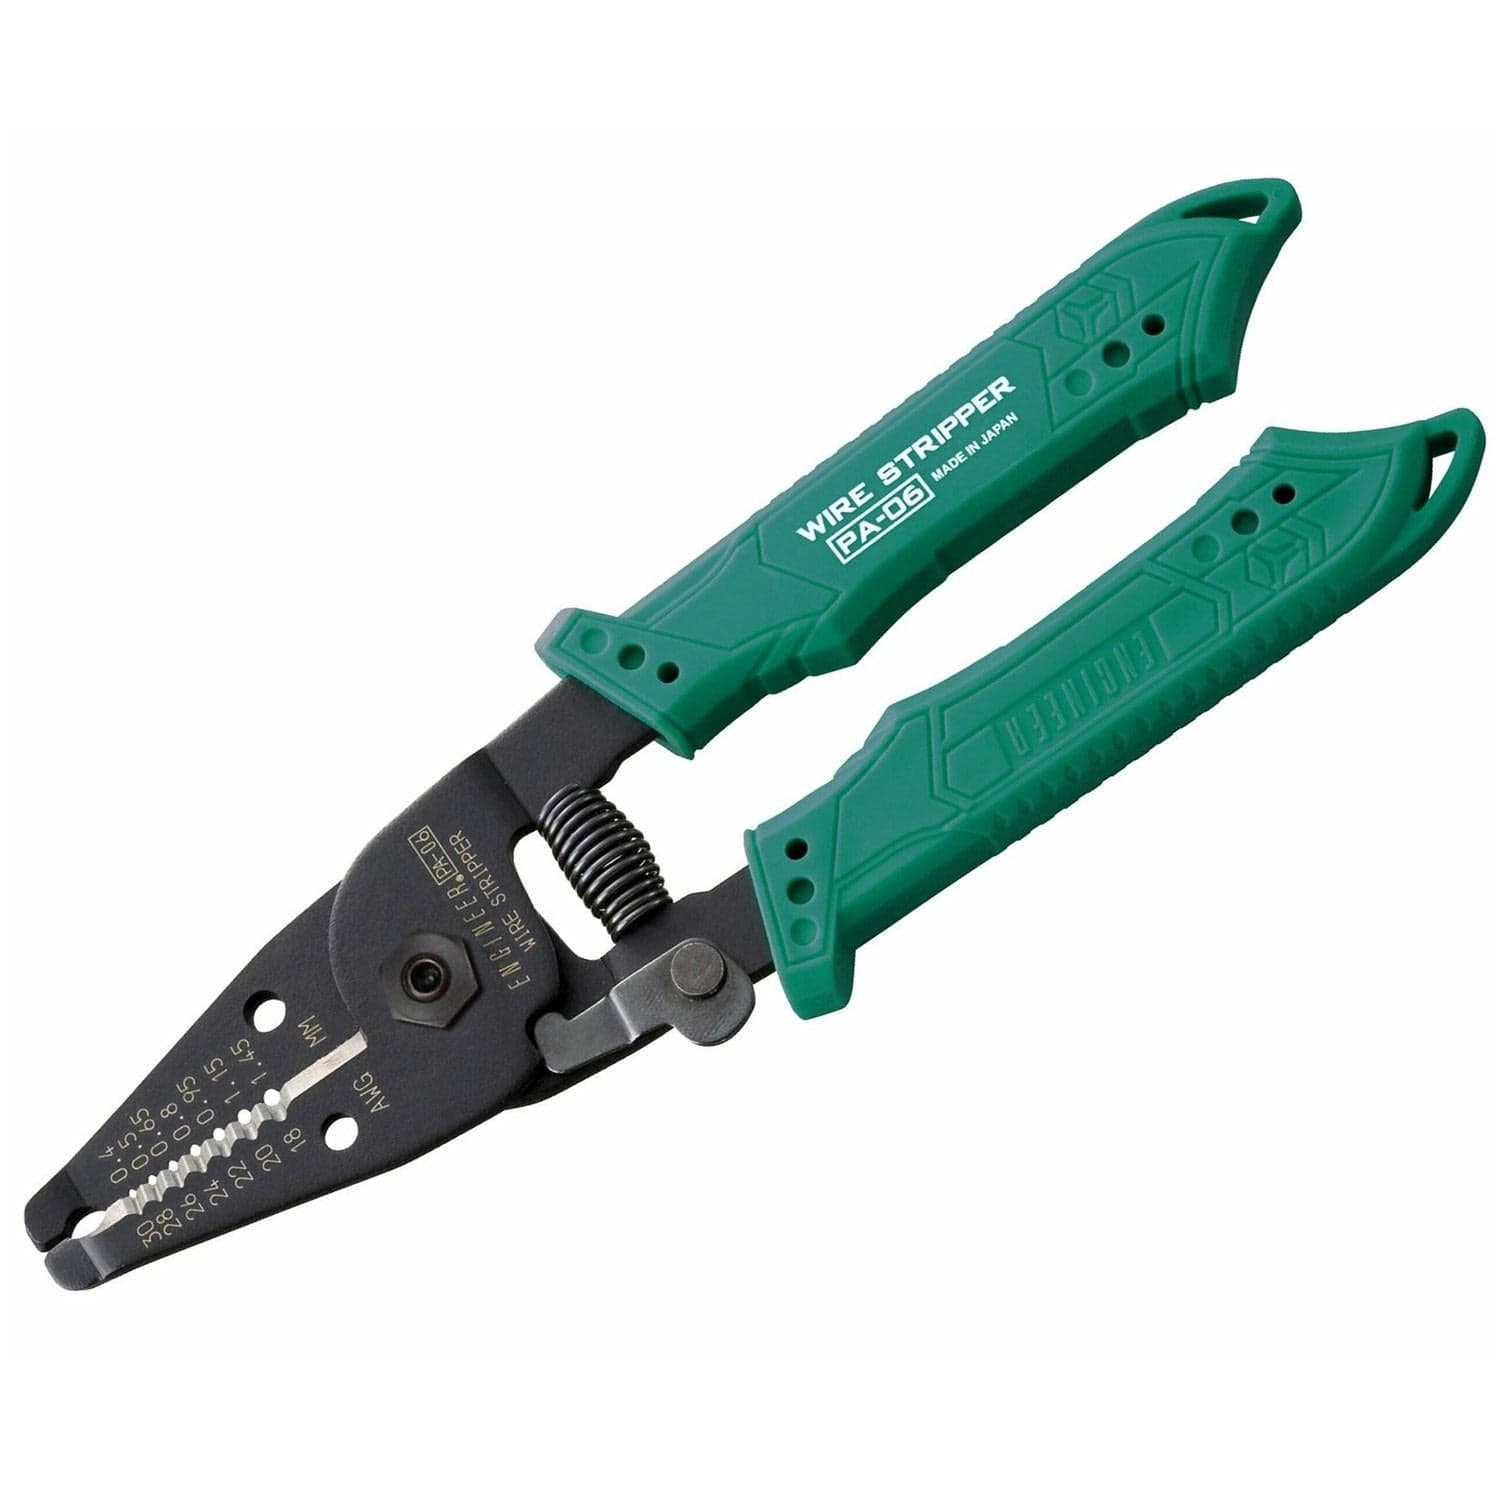 Engineer PA-06 Pro Wire Strippers (AWG16-AWG30) - The Pi Hut